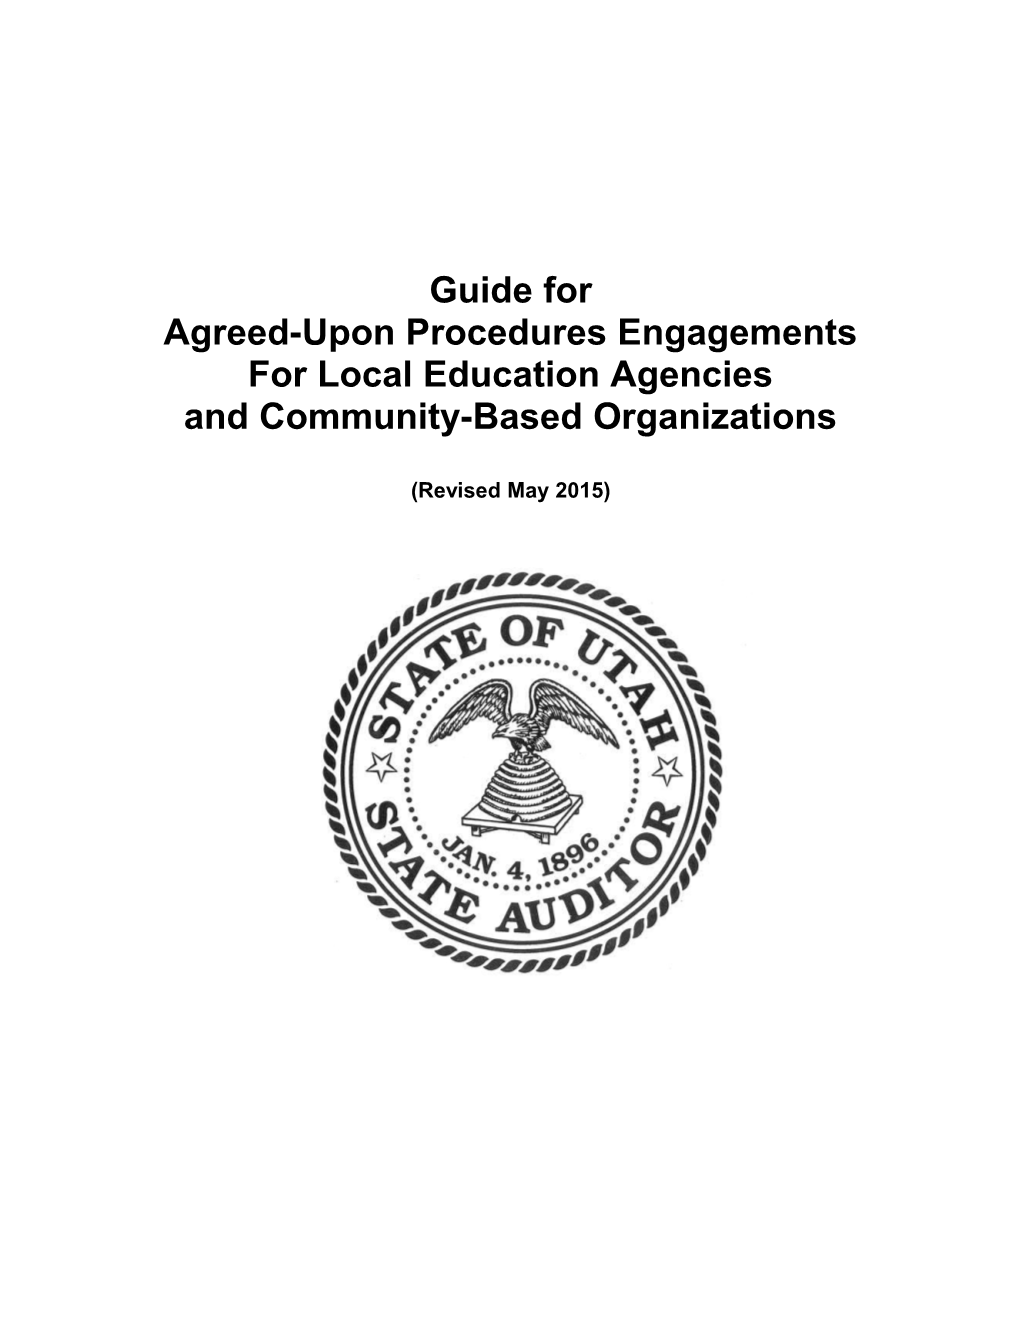 Agreed-Upon Procedures Engagements